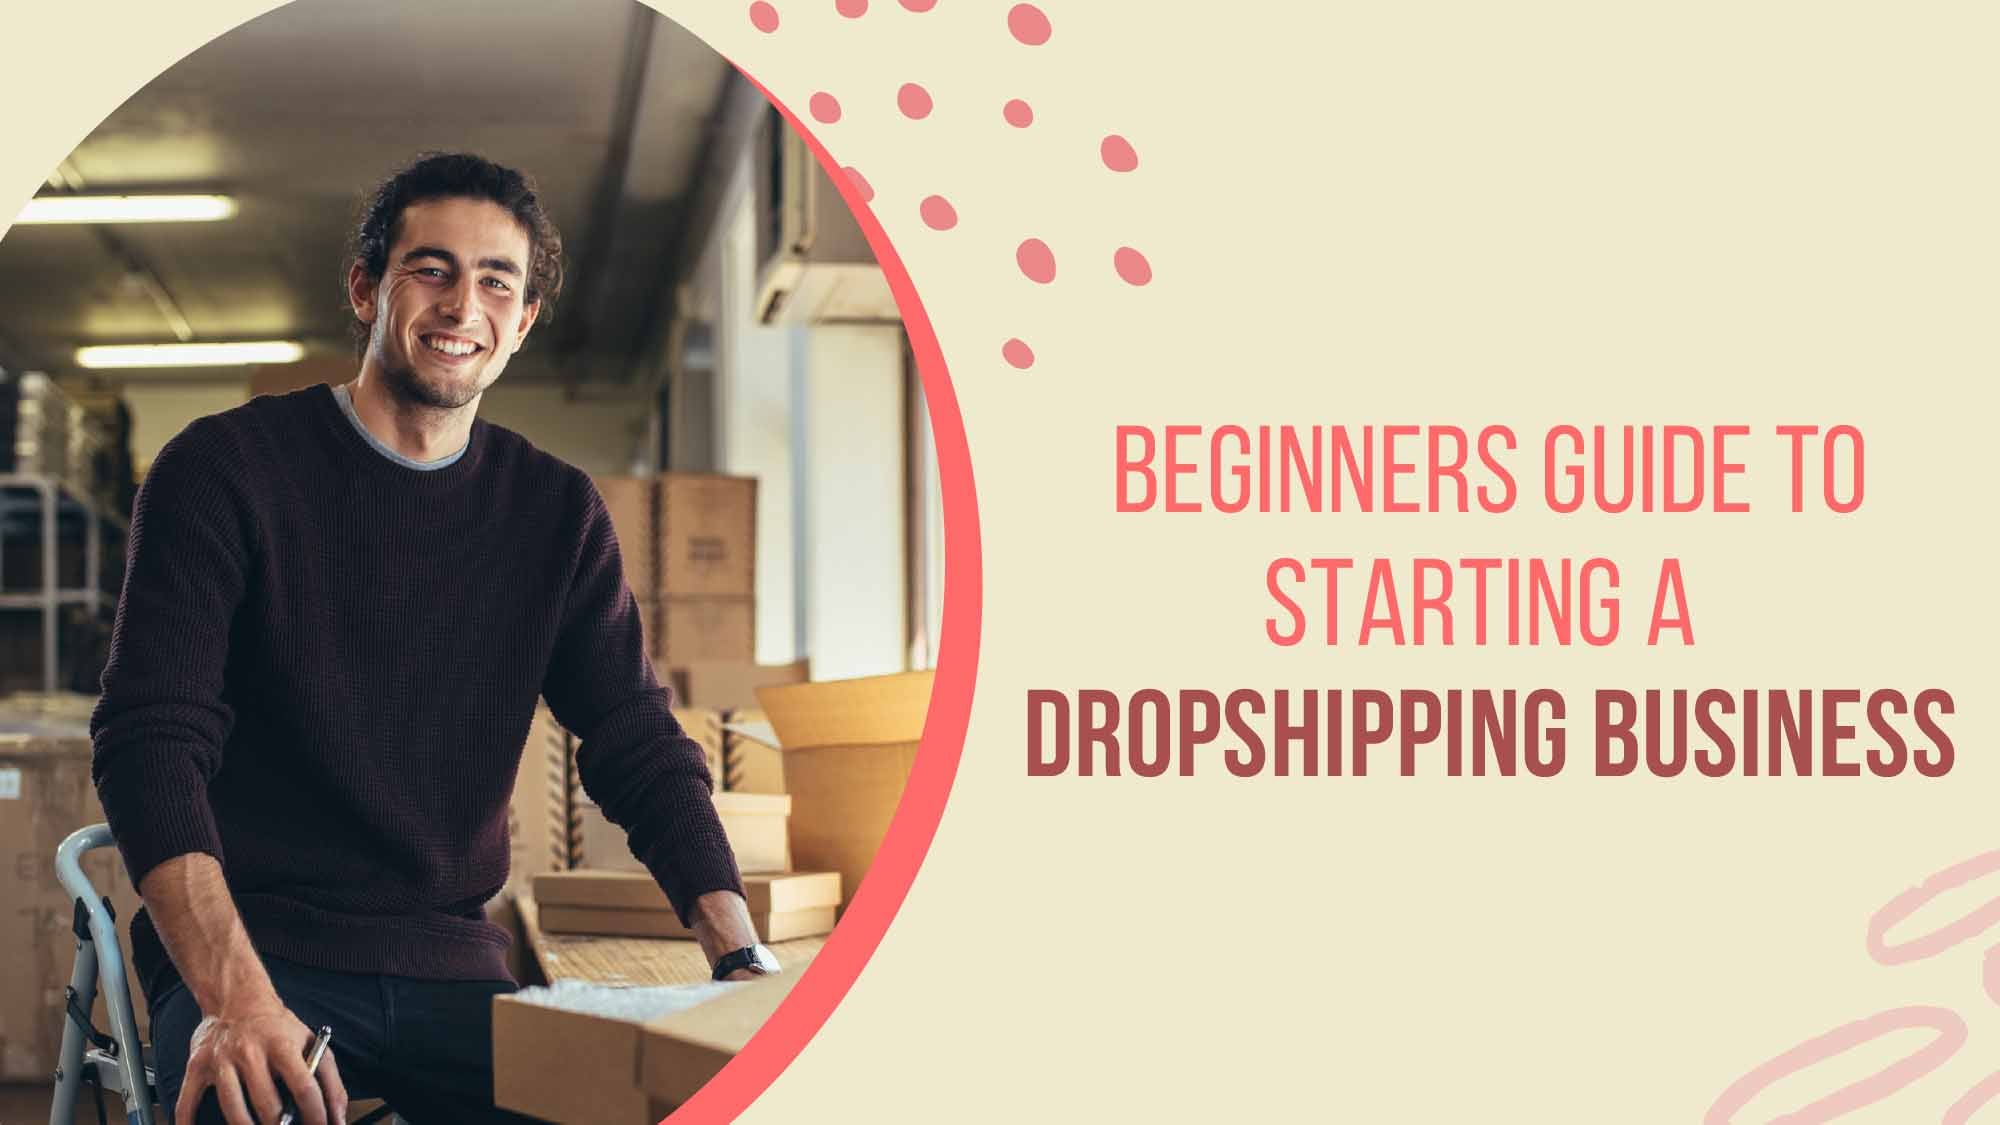 The Ultimate Beginners Guide To Starting A Dropshipping Business